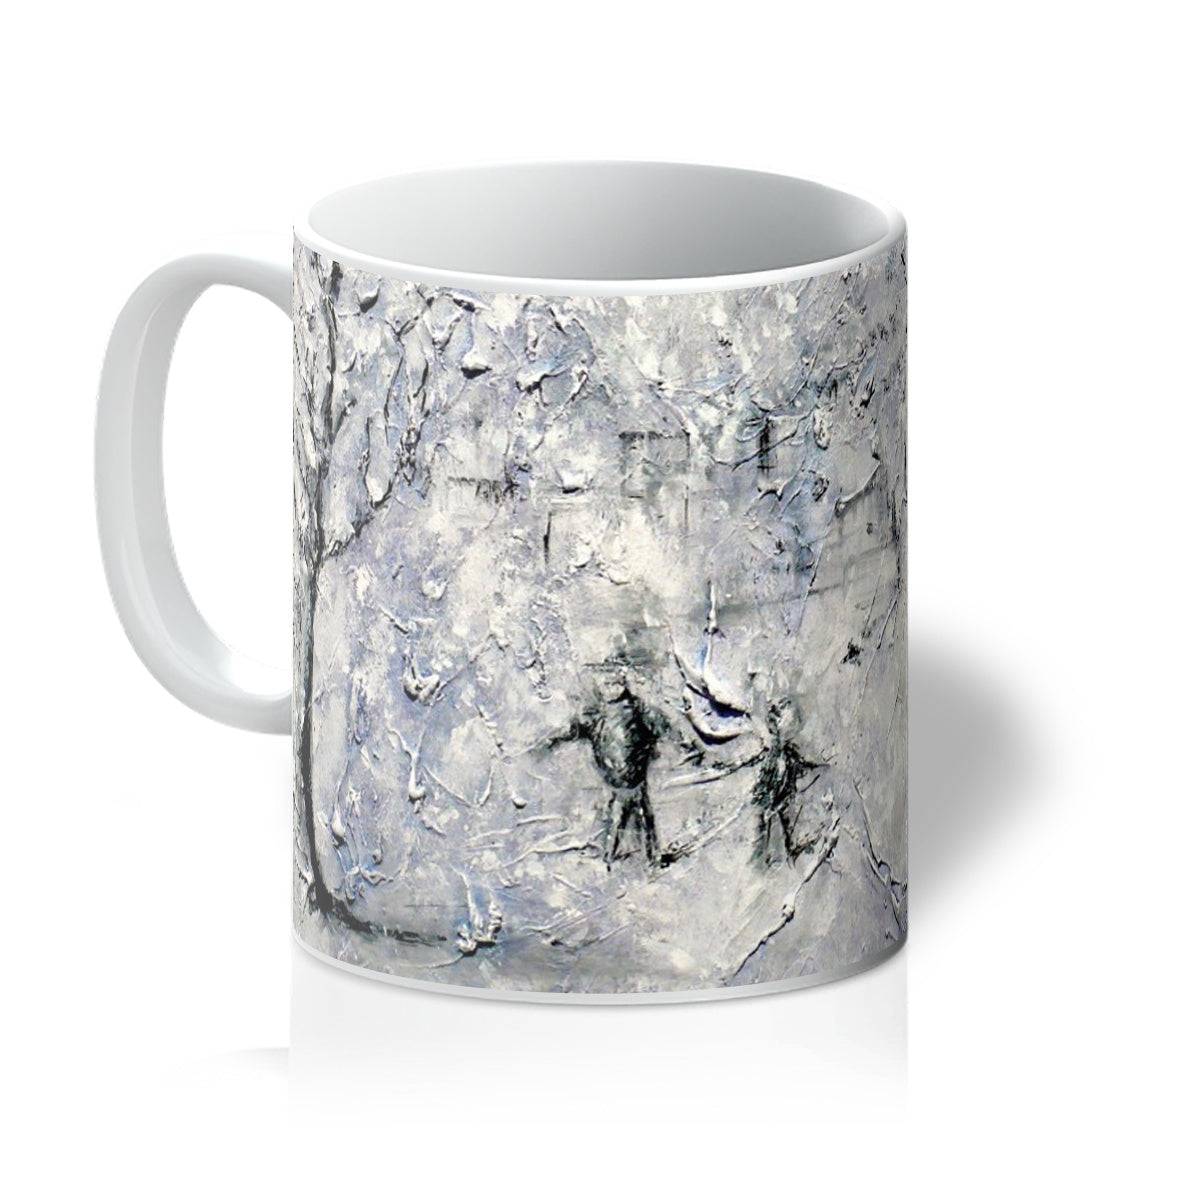 Father Daughter Snow Art Gifts Mug-Mugs-Abstract & Impressionistic Art Gallery-11oz-White-Paintings, Prints, Homeware, Art Gifts From Scotland By Scottish Artist Kevin Hunter